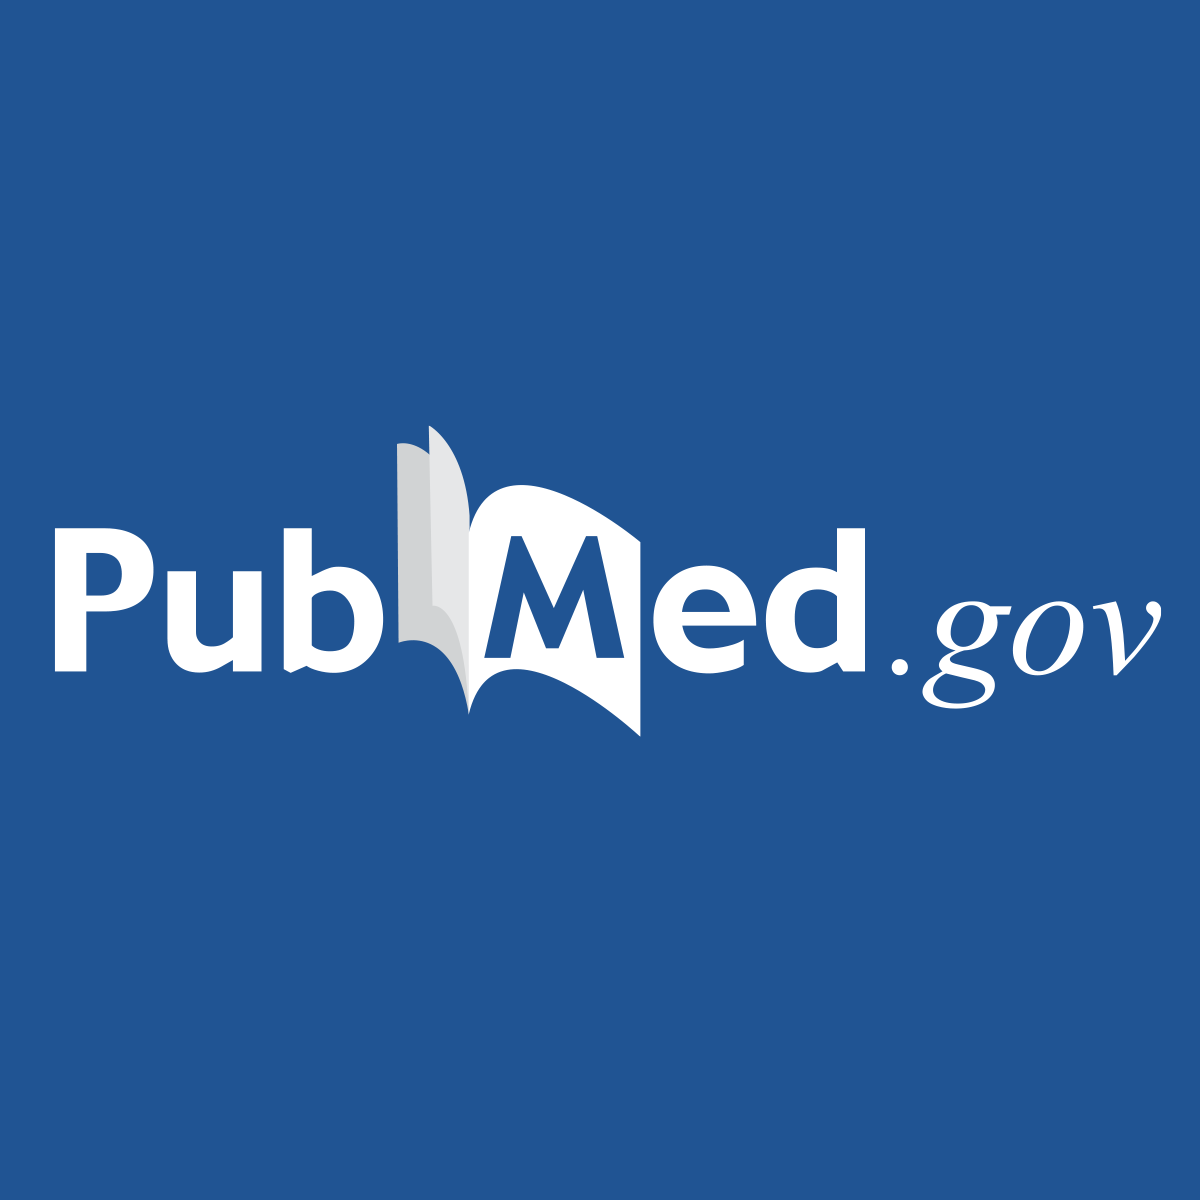 Randomized Phase III Postoperative Trial of Platinum-Based Chemotherapy Versus Capecitabine in Patients With Residual Triple-Negative Breast Cancer Following Neoadjuvant Chemotherapy: ECOG-ACRIN EA1131 - PubMed